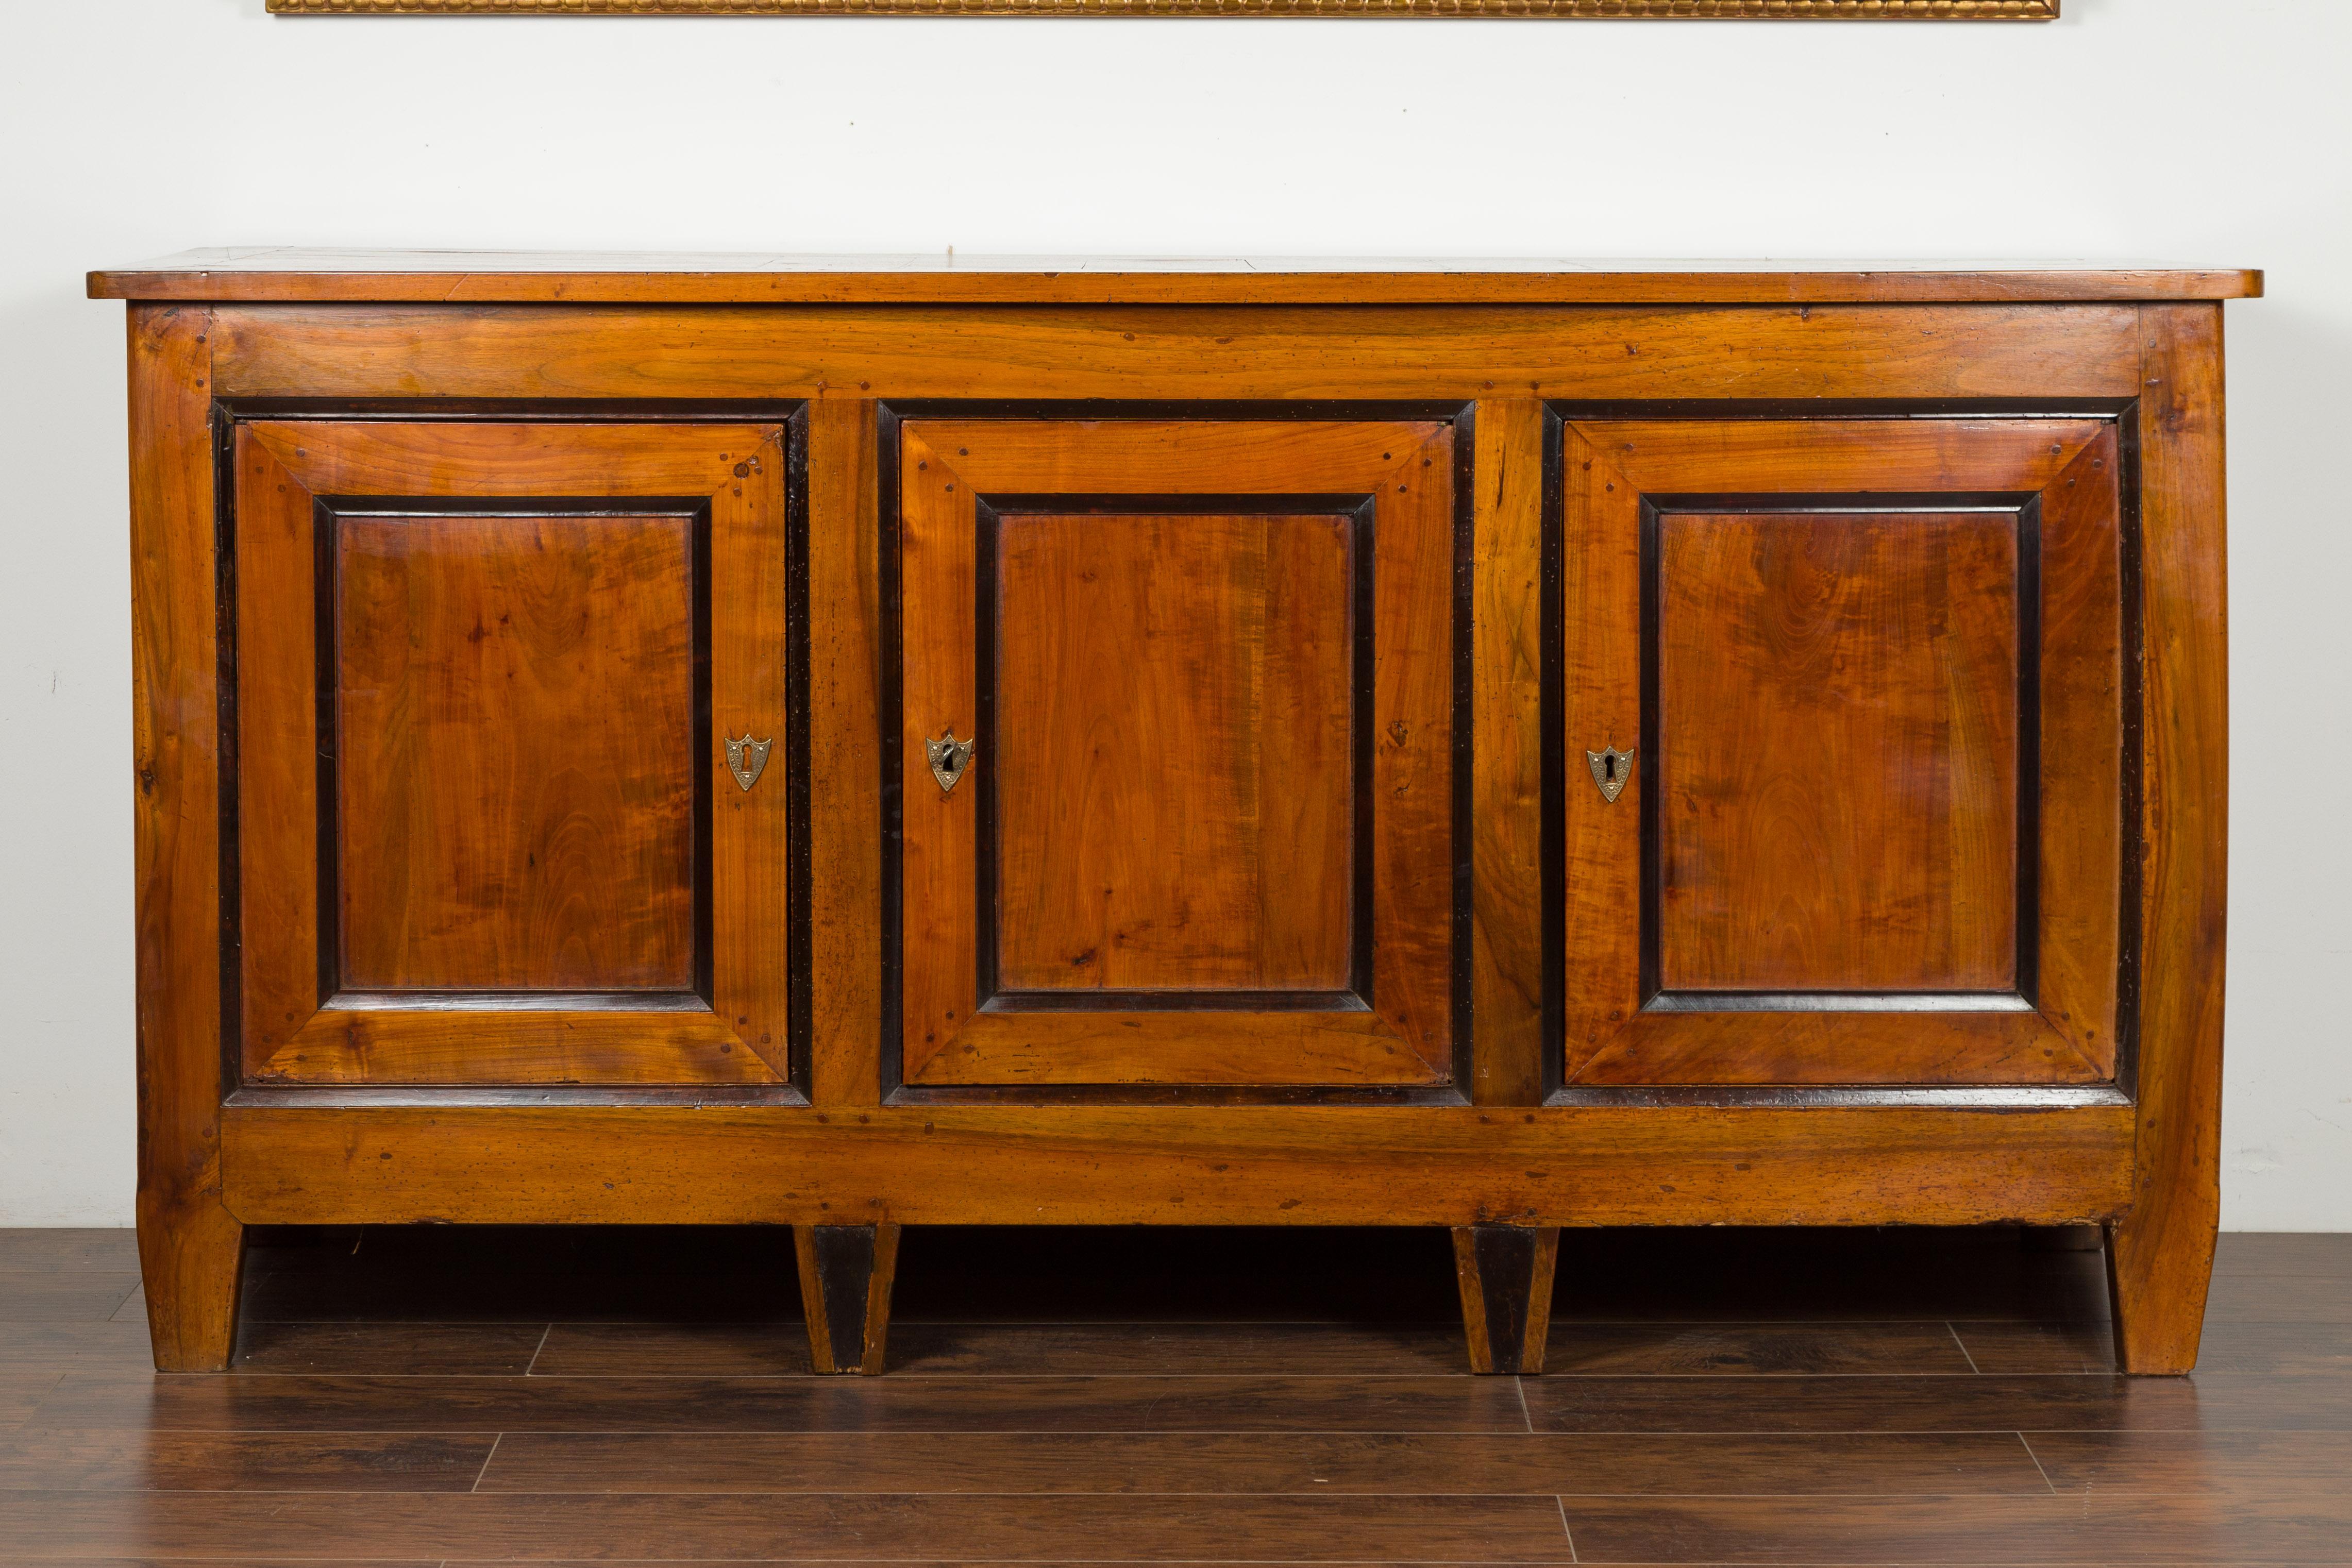 An Austrian Biedermeier period walnut three-door enfilade from the mid-19th century, with ebonized accents. Created in Austria during the second quarter of the 19th century, this walnut enfilade features a rectangular planked top sitting above three